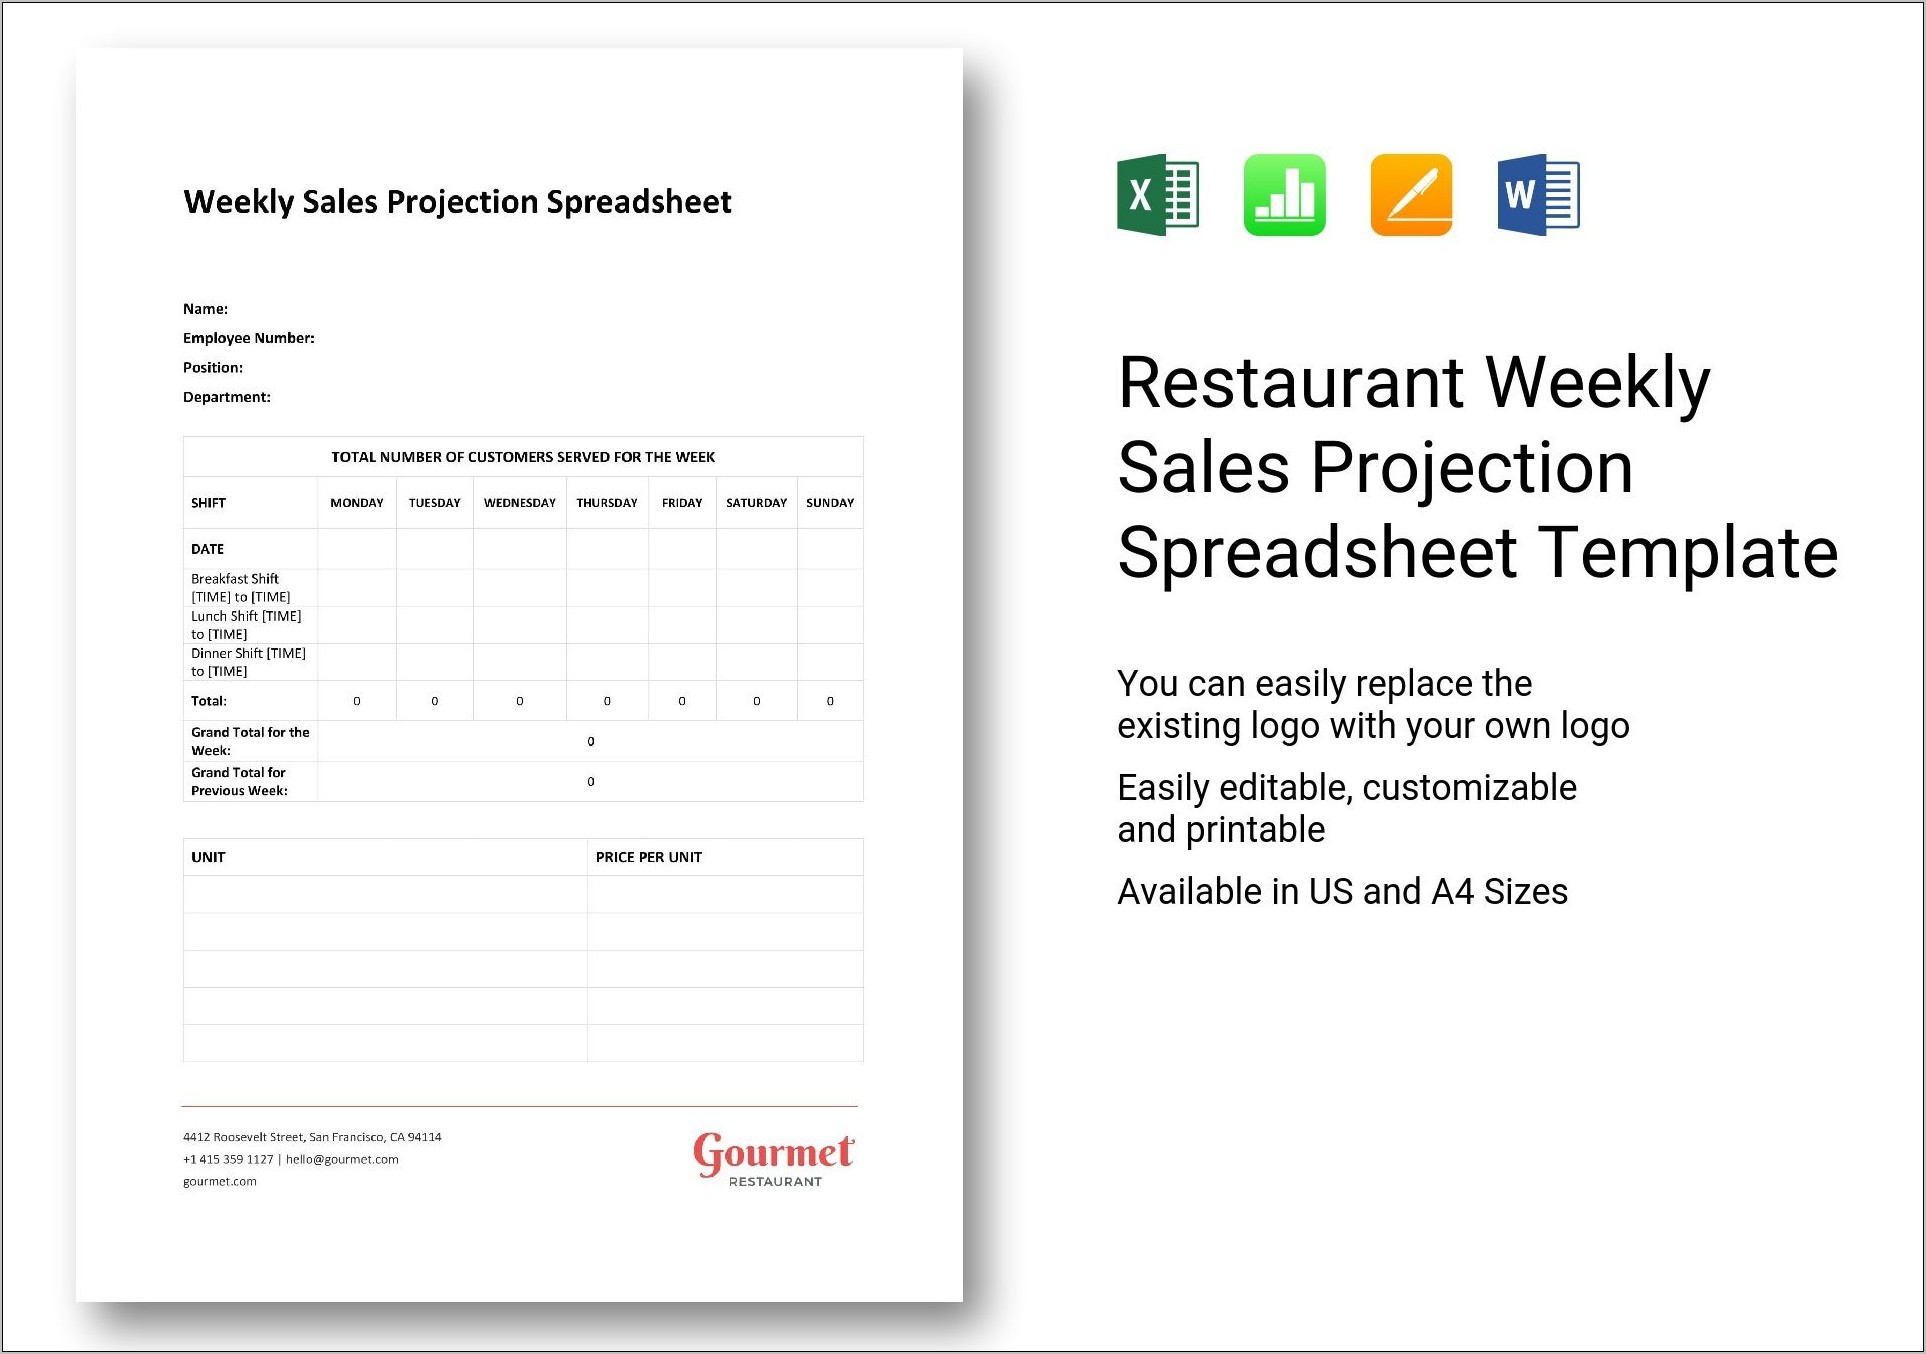 Sales Projection Spreadsheet Template